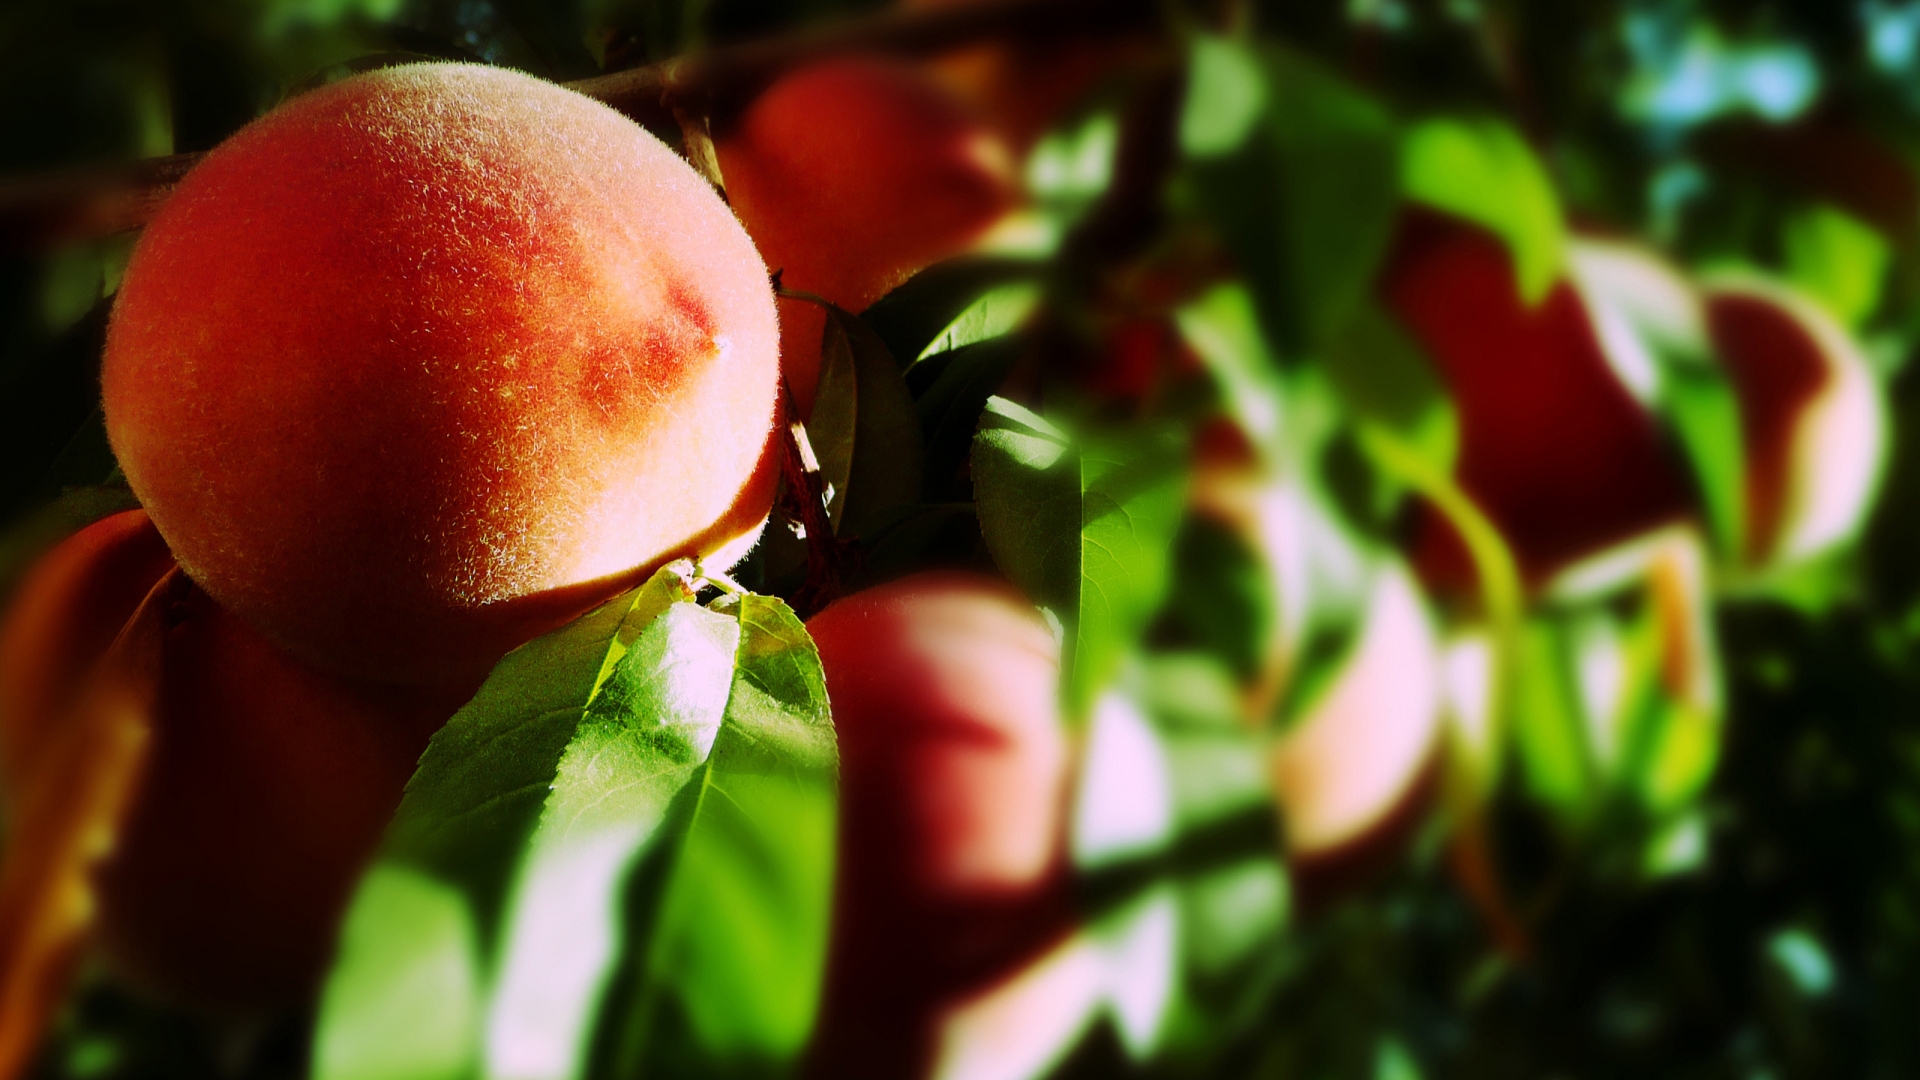 Blurry Peaches for 1920 x 1080 HDTV 1080p resolution